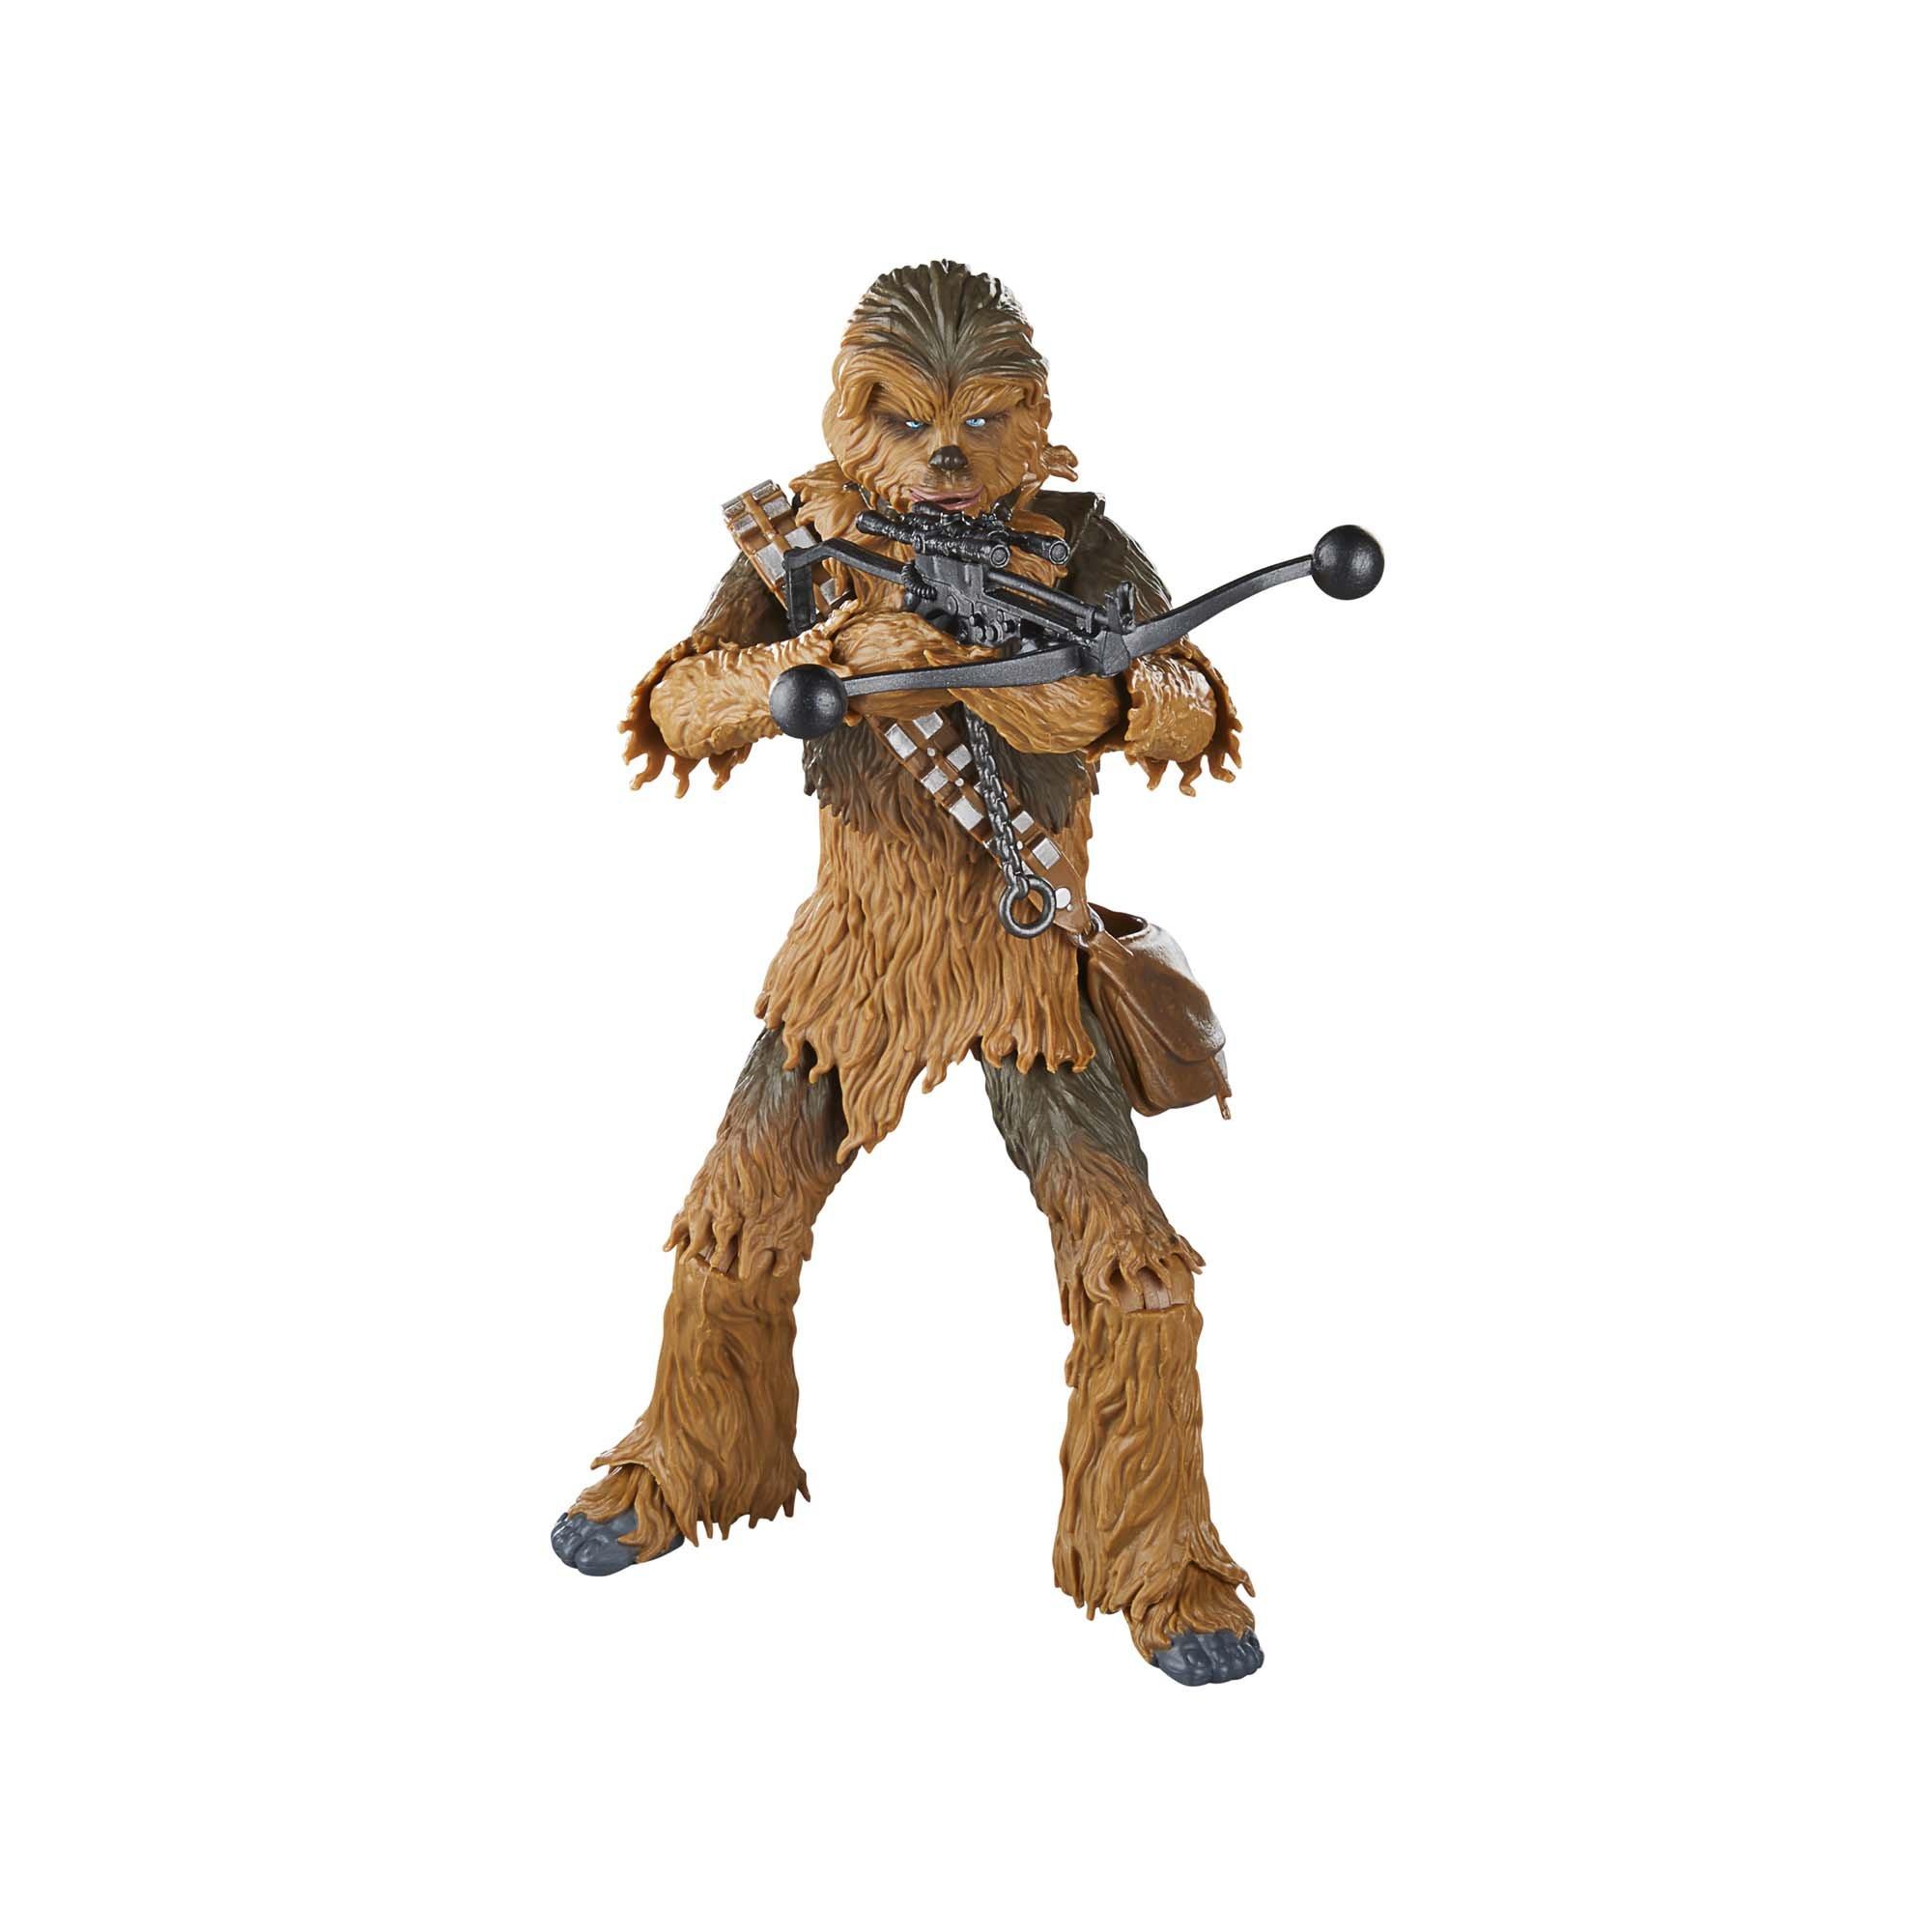 Hasbro Star Wars: The Black Series Star Wars: Return of the Jedi Chewbacca 6-in Action Figure